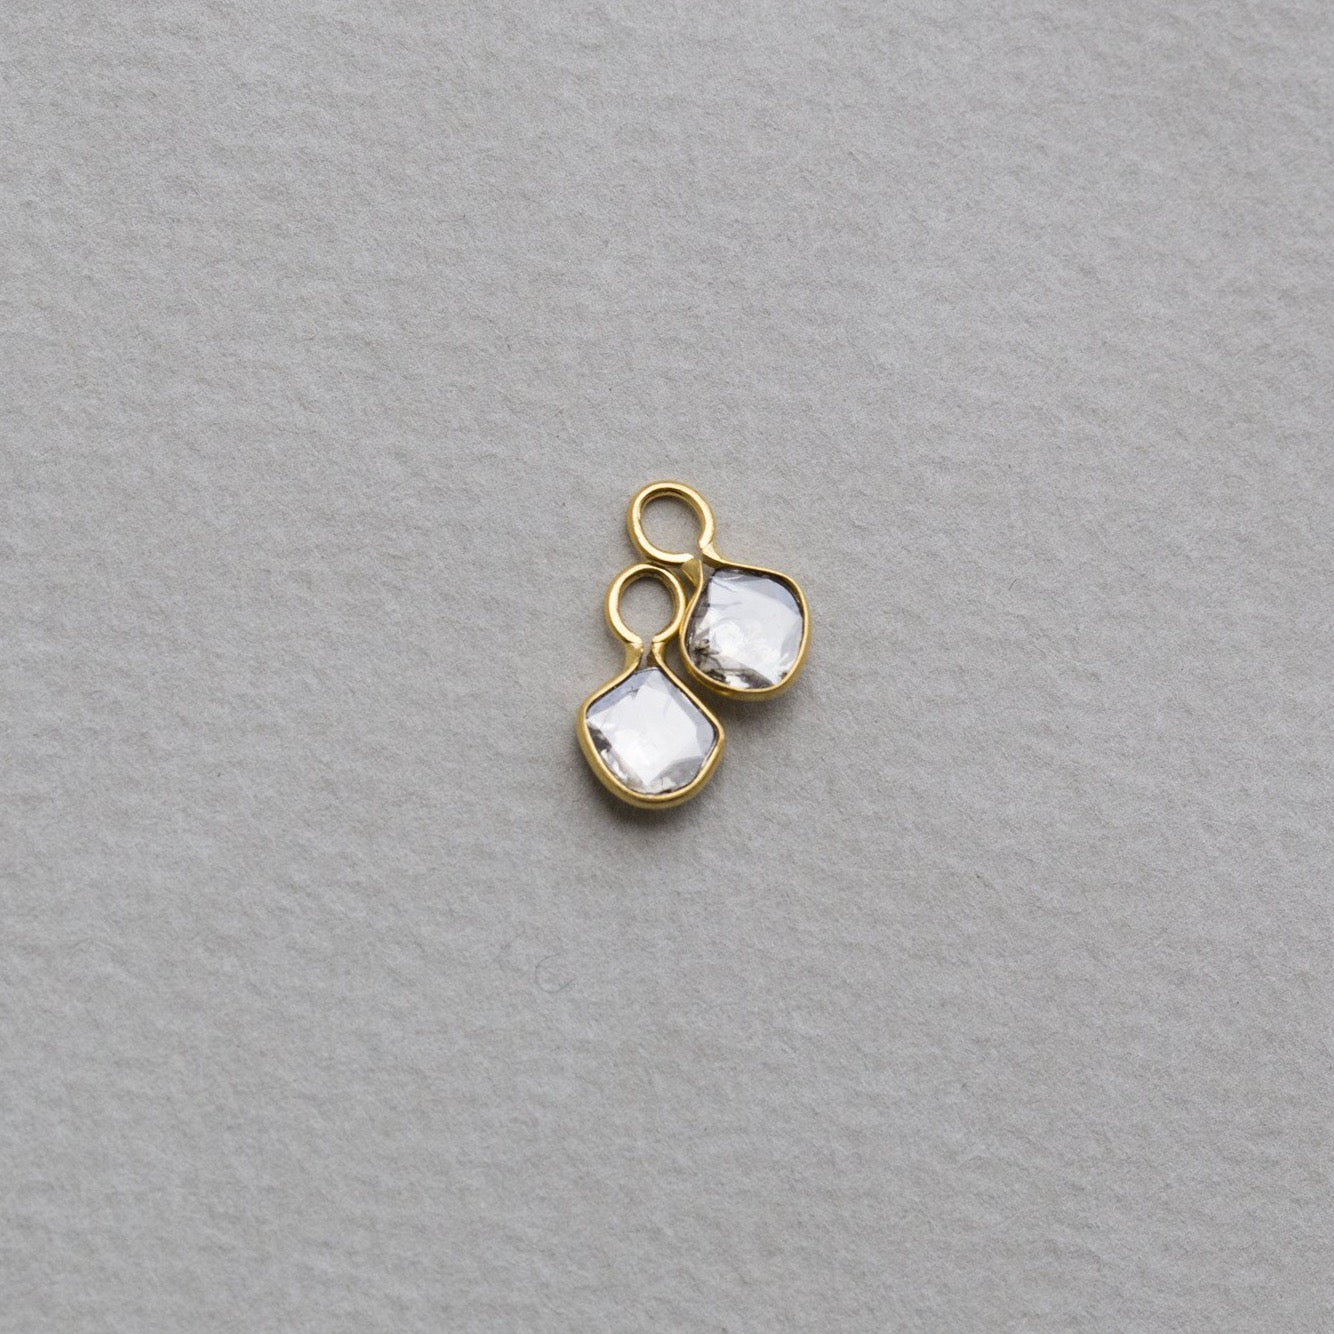 spectacular charm earrings - made especially for our plain hoops